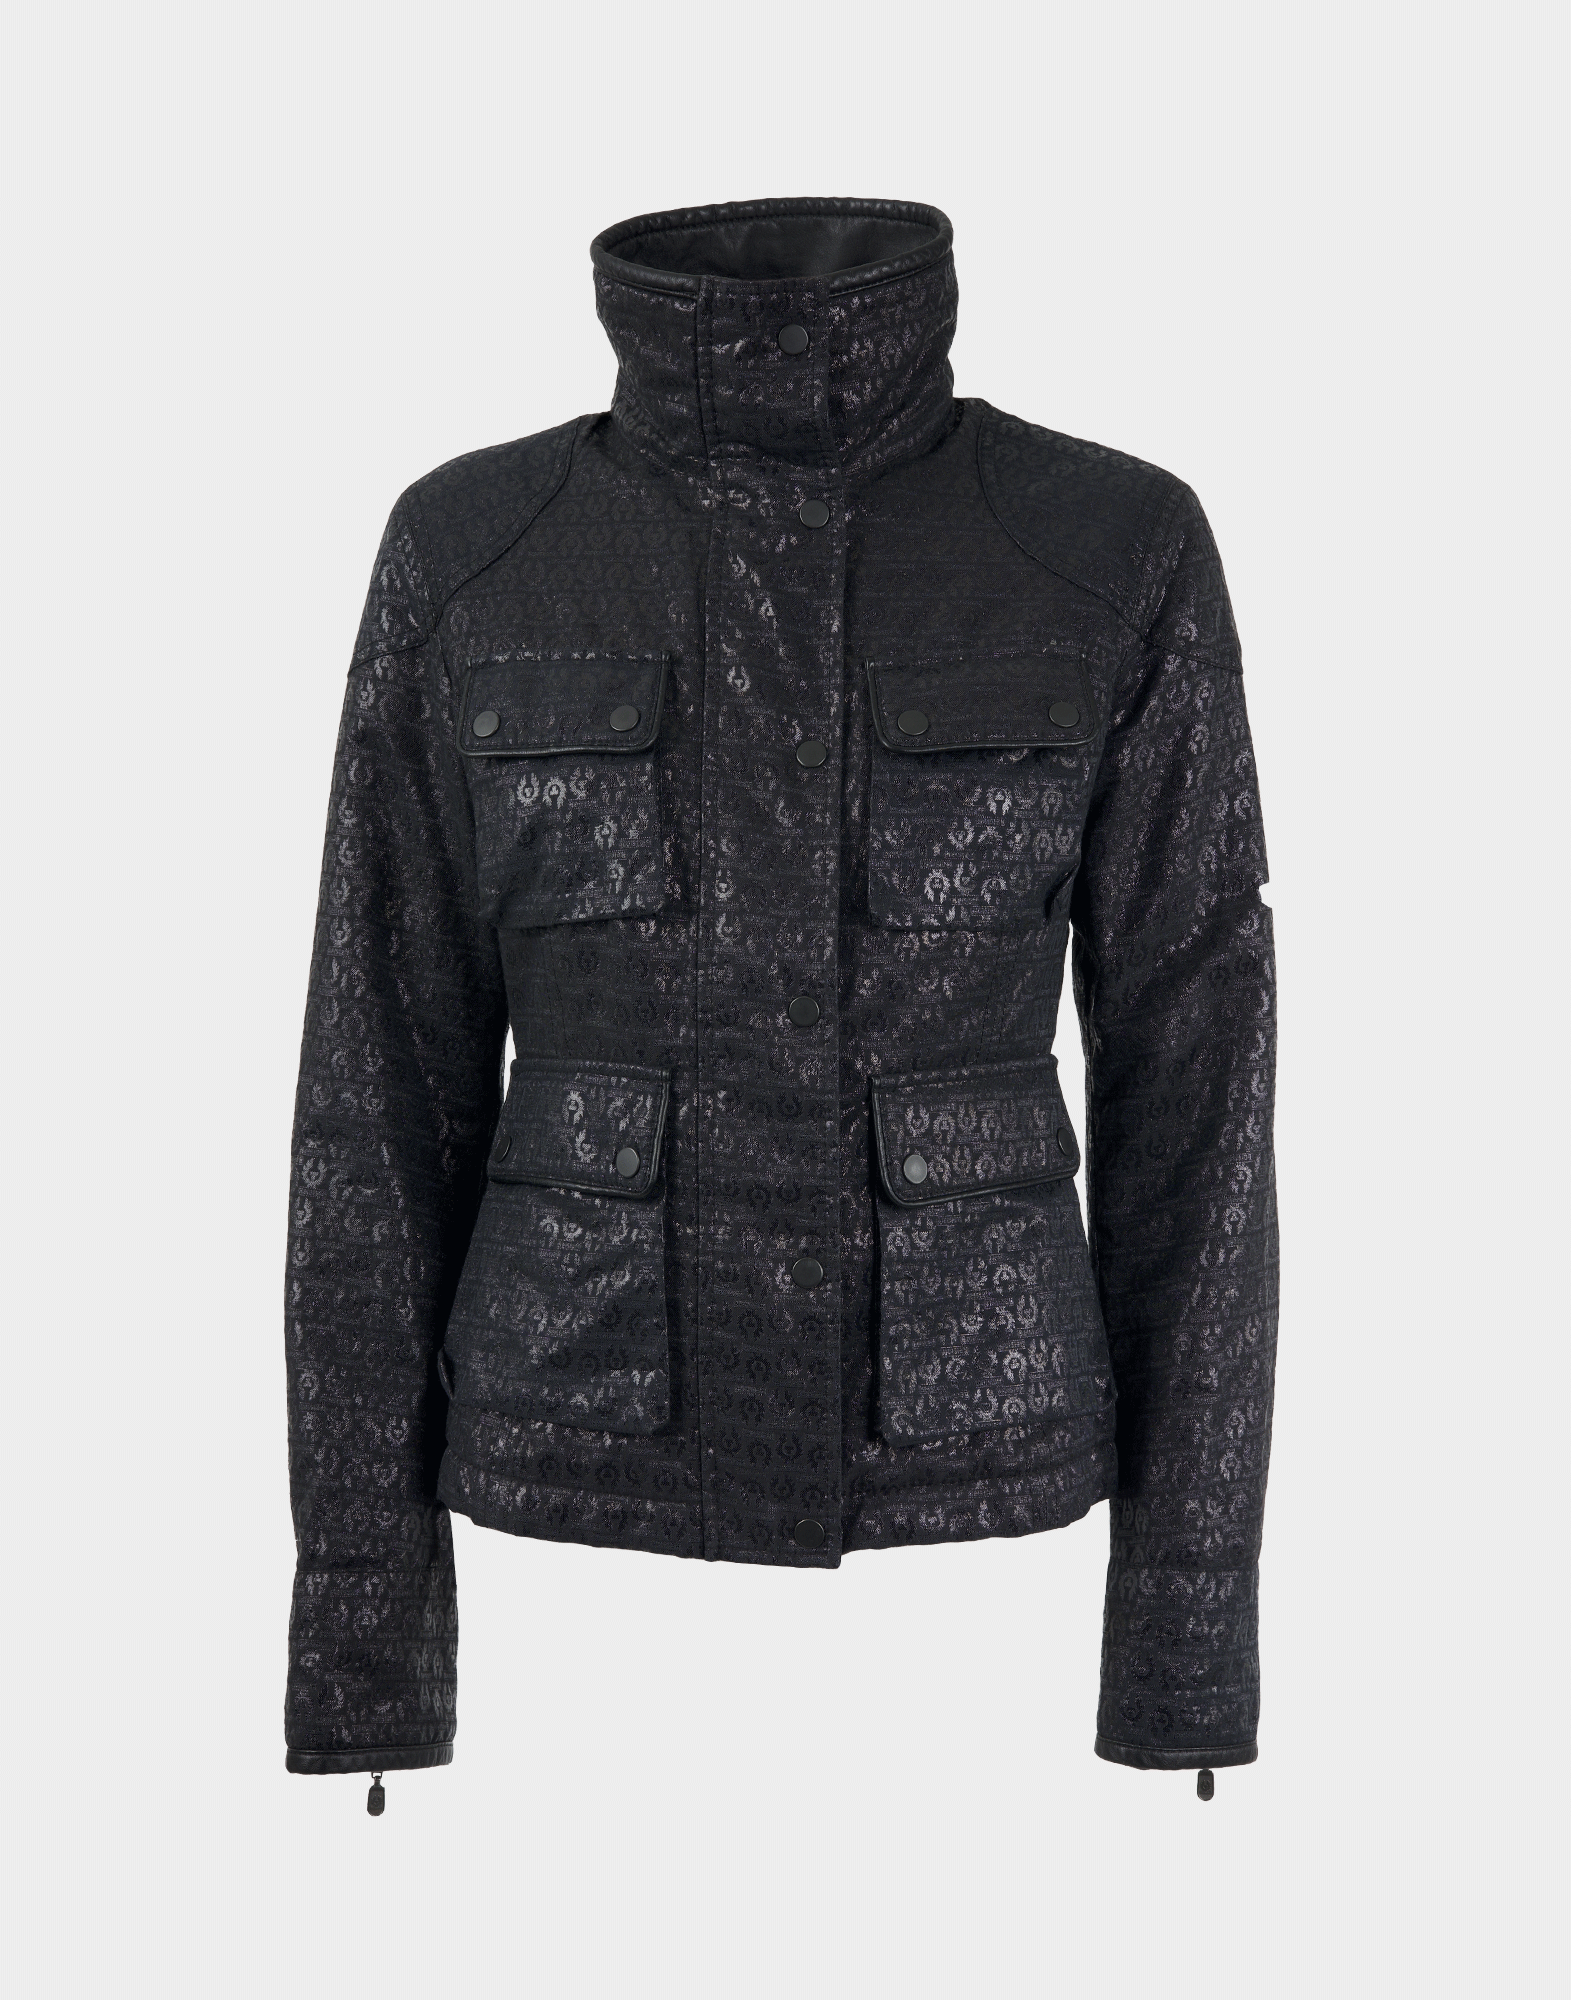 Women's black jacket with printed logo, high collar, four front pockets